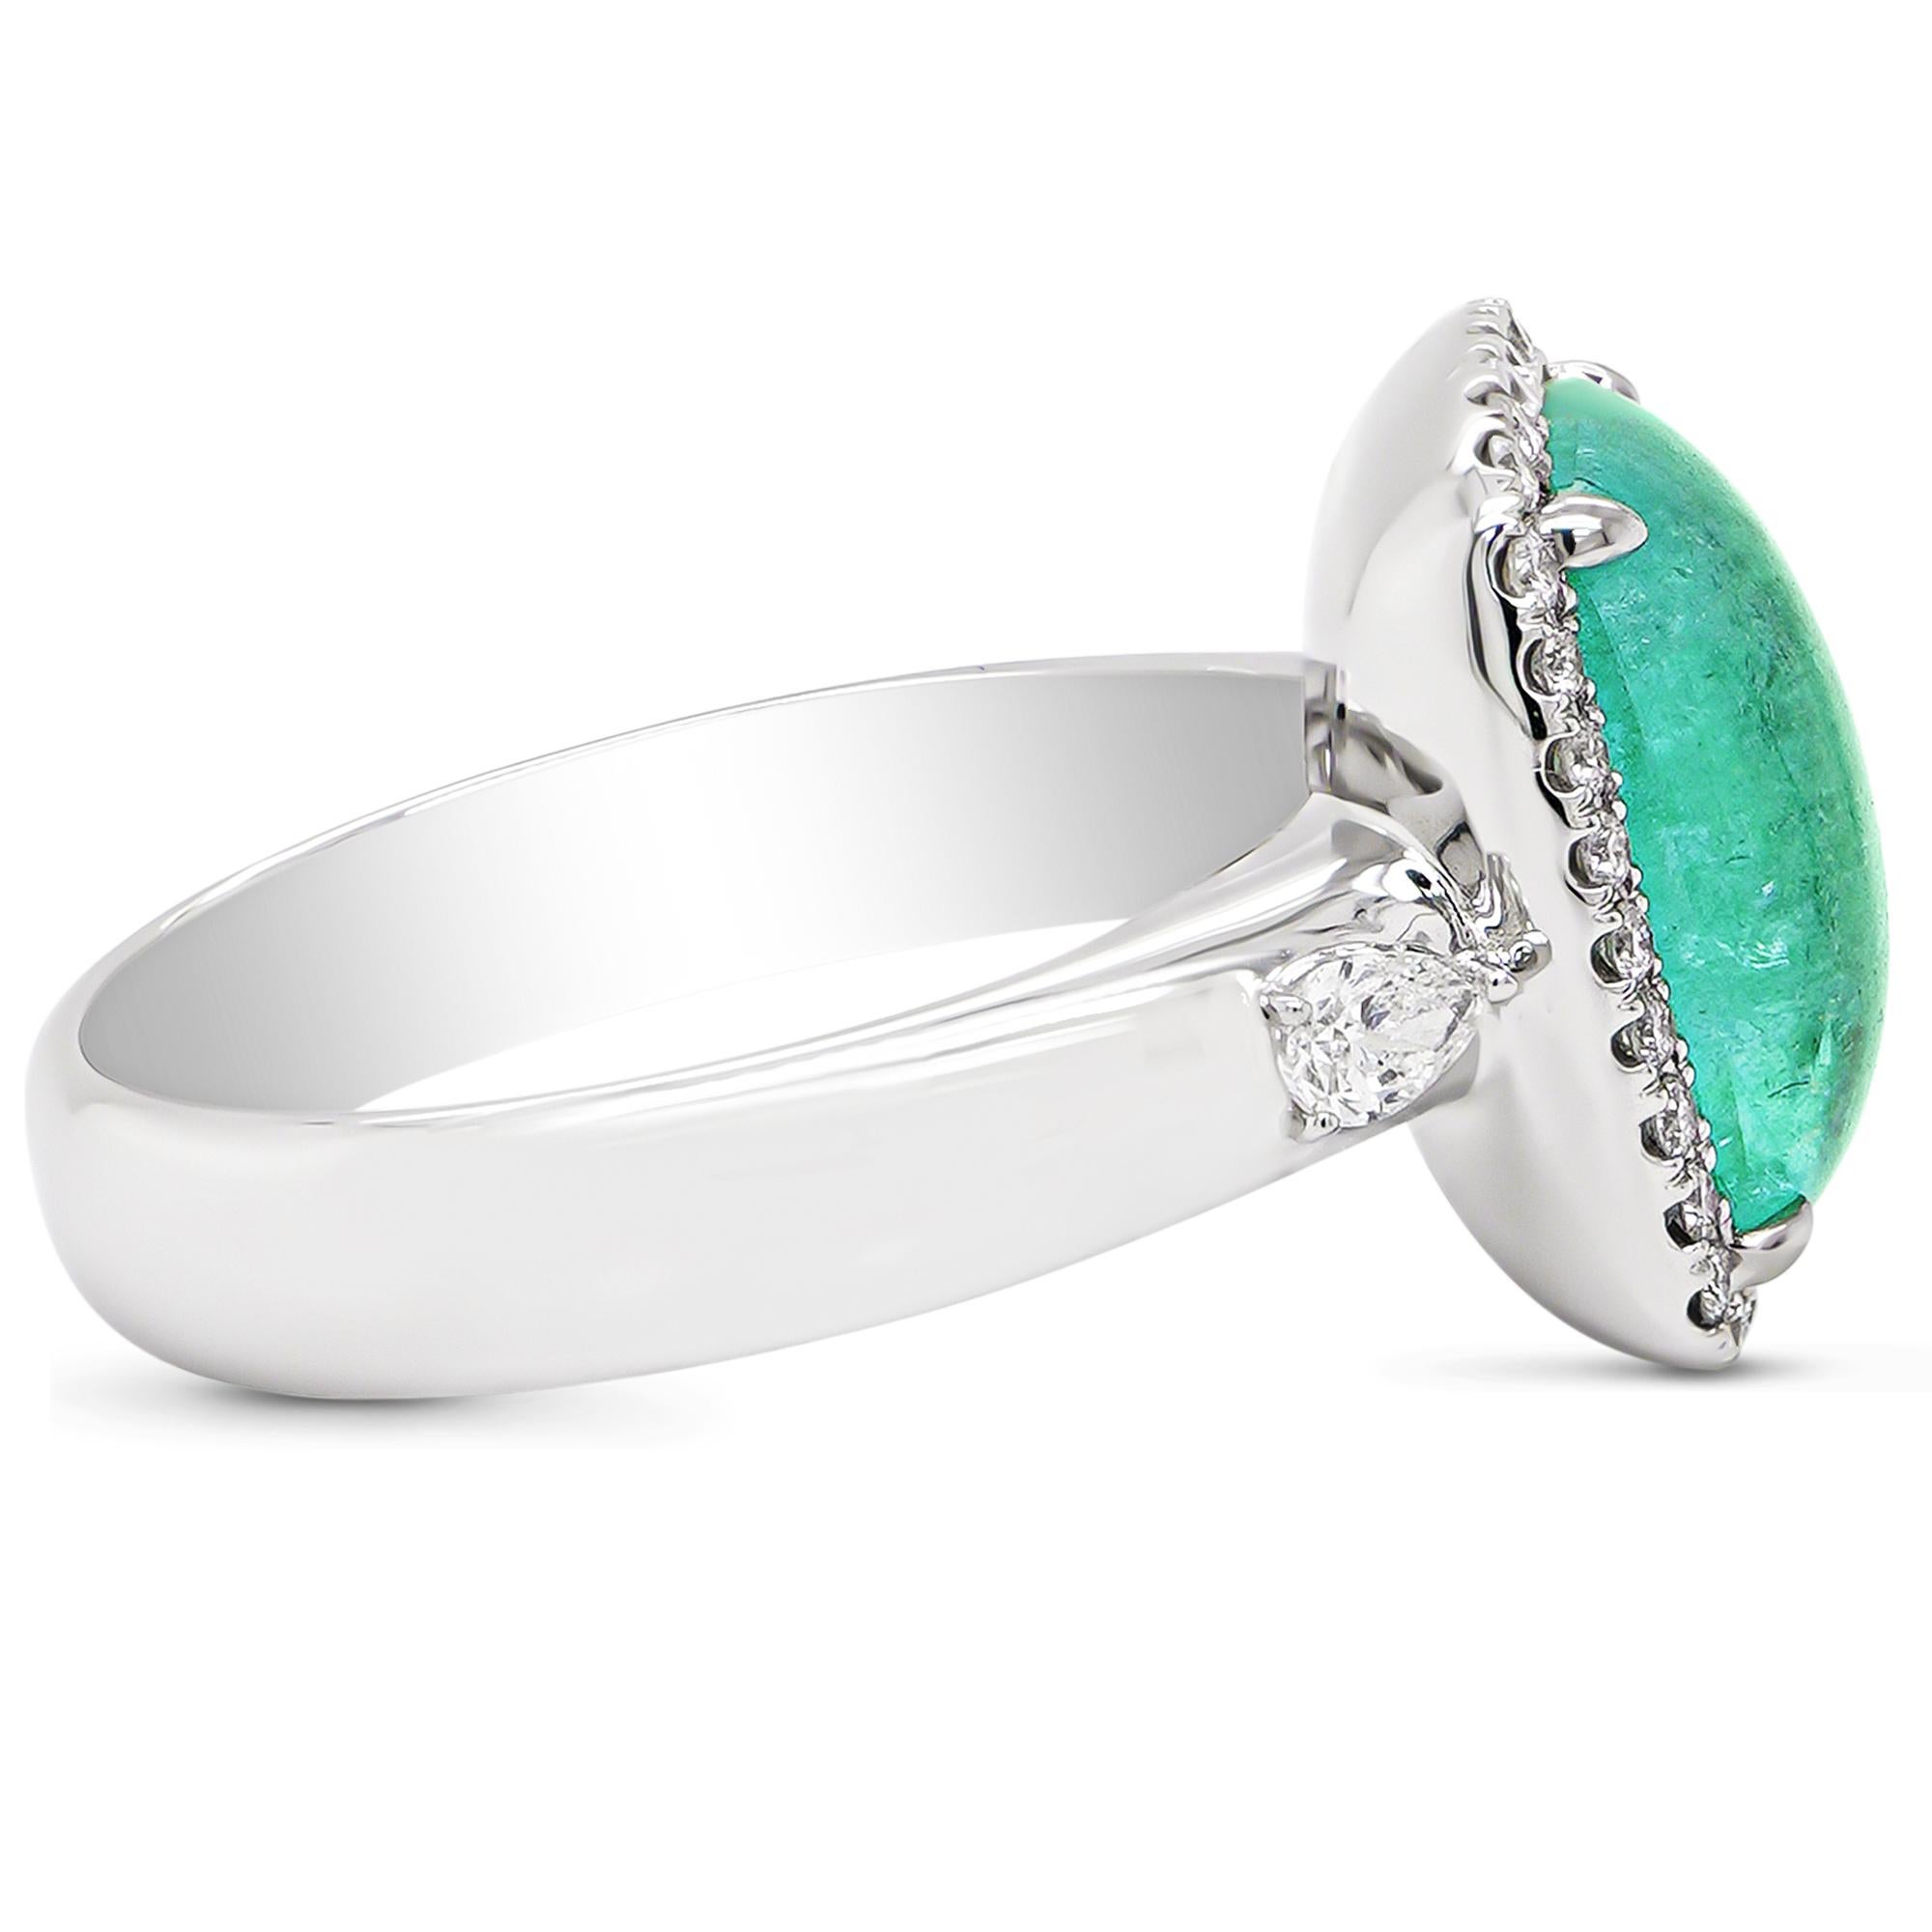 Paraiba tourmalines are sought after by collectors and connoisseurs, but not only for their otherworldly colour: they are highly prized for their rarity. Only one Paraiba tourmaline is mined for every 10,000 diamonds, making them one of the rarest